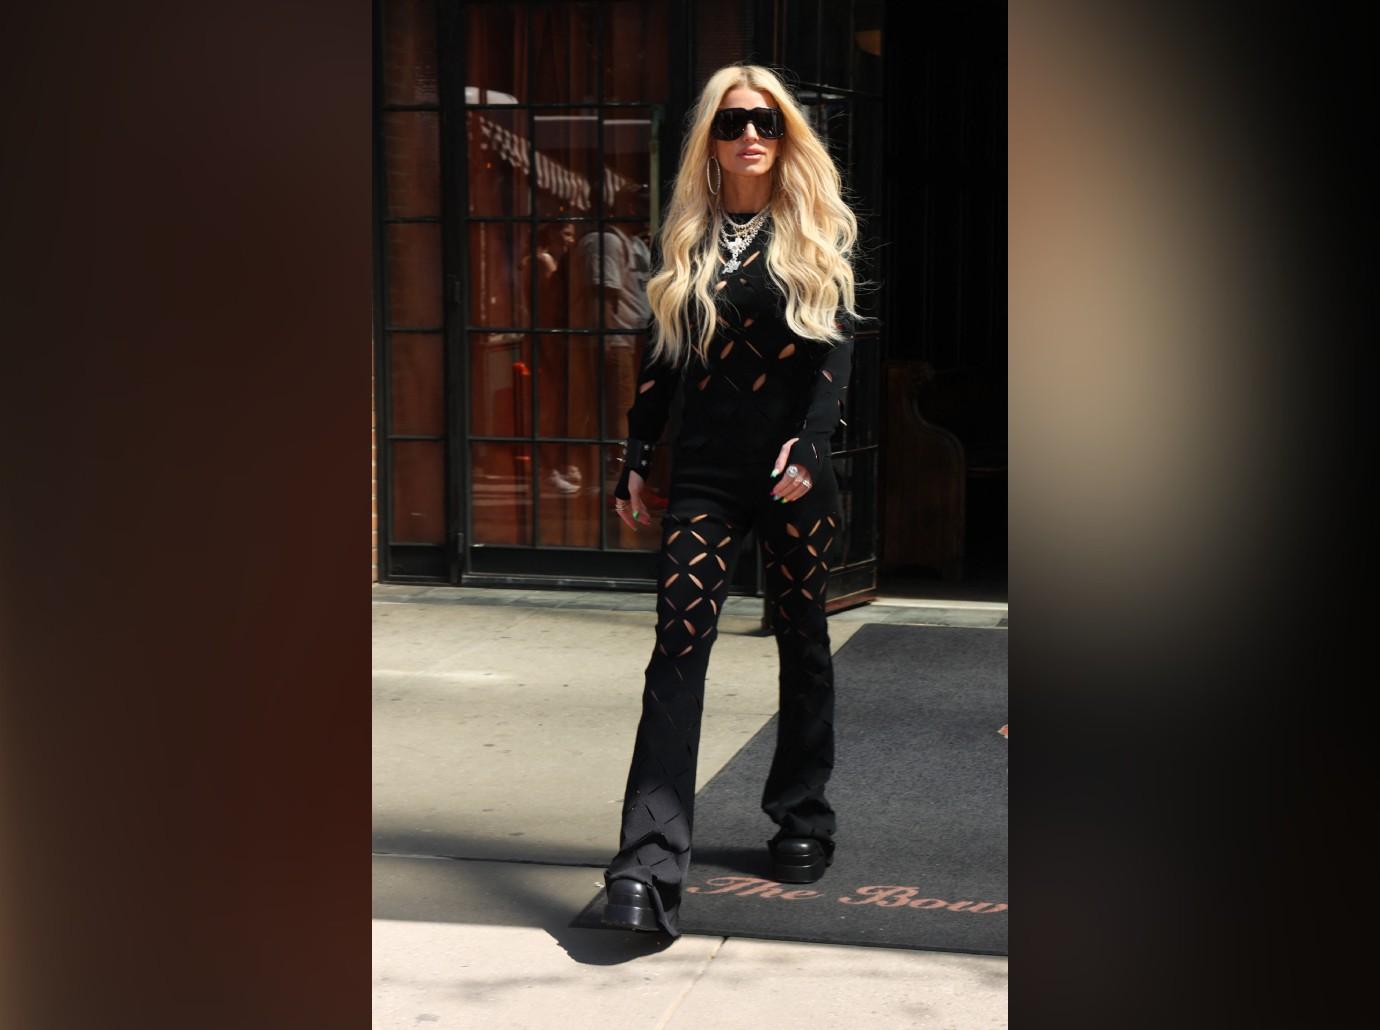 Jessica Simpson is all laced up in edgy leather pants